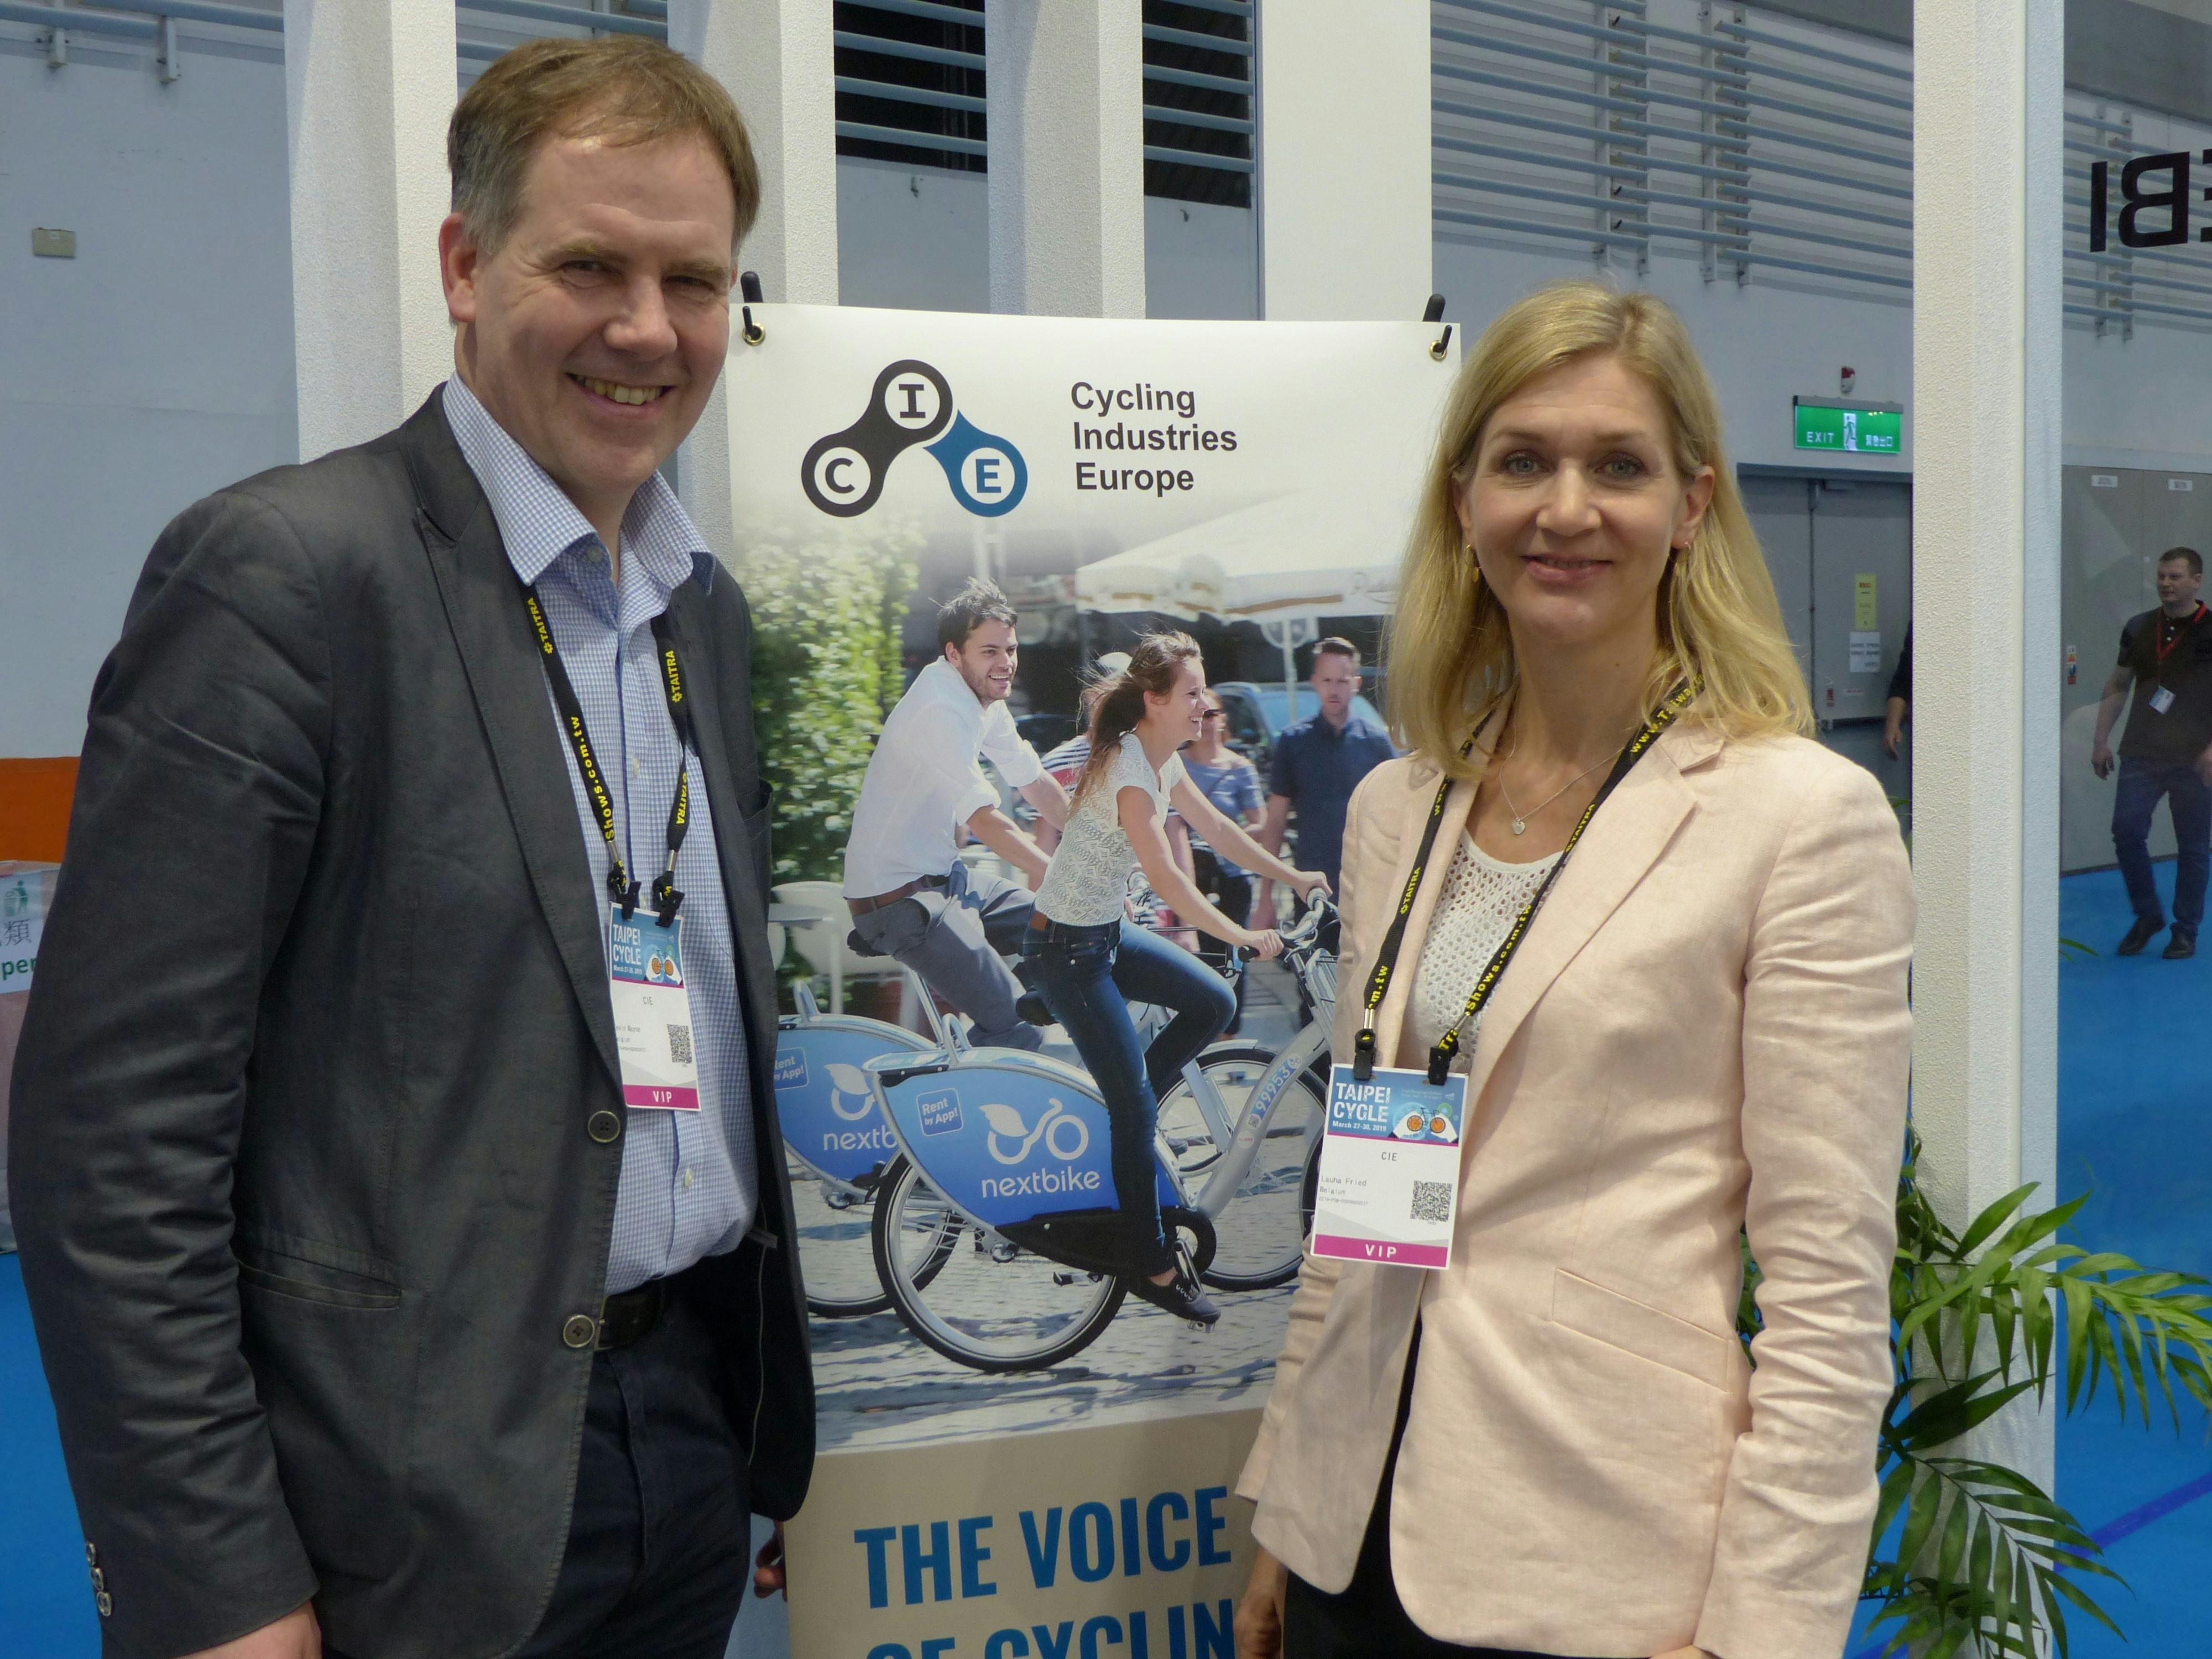 Cycling Industries Europe, with CEO Kevin Mayne and Policy Director Lauha Fried, has secured partnership in two European Union projects. – Photo Bike Europe